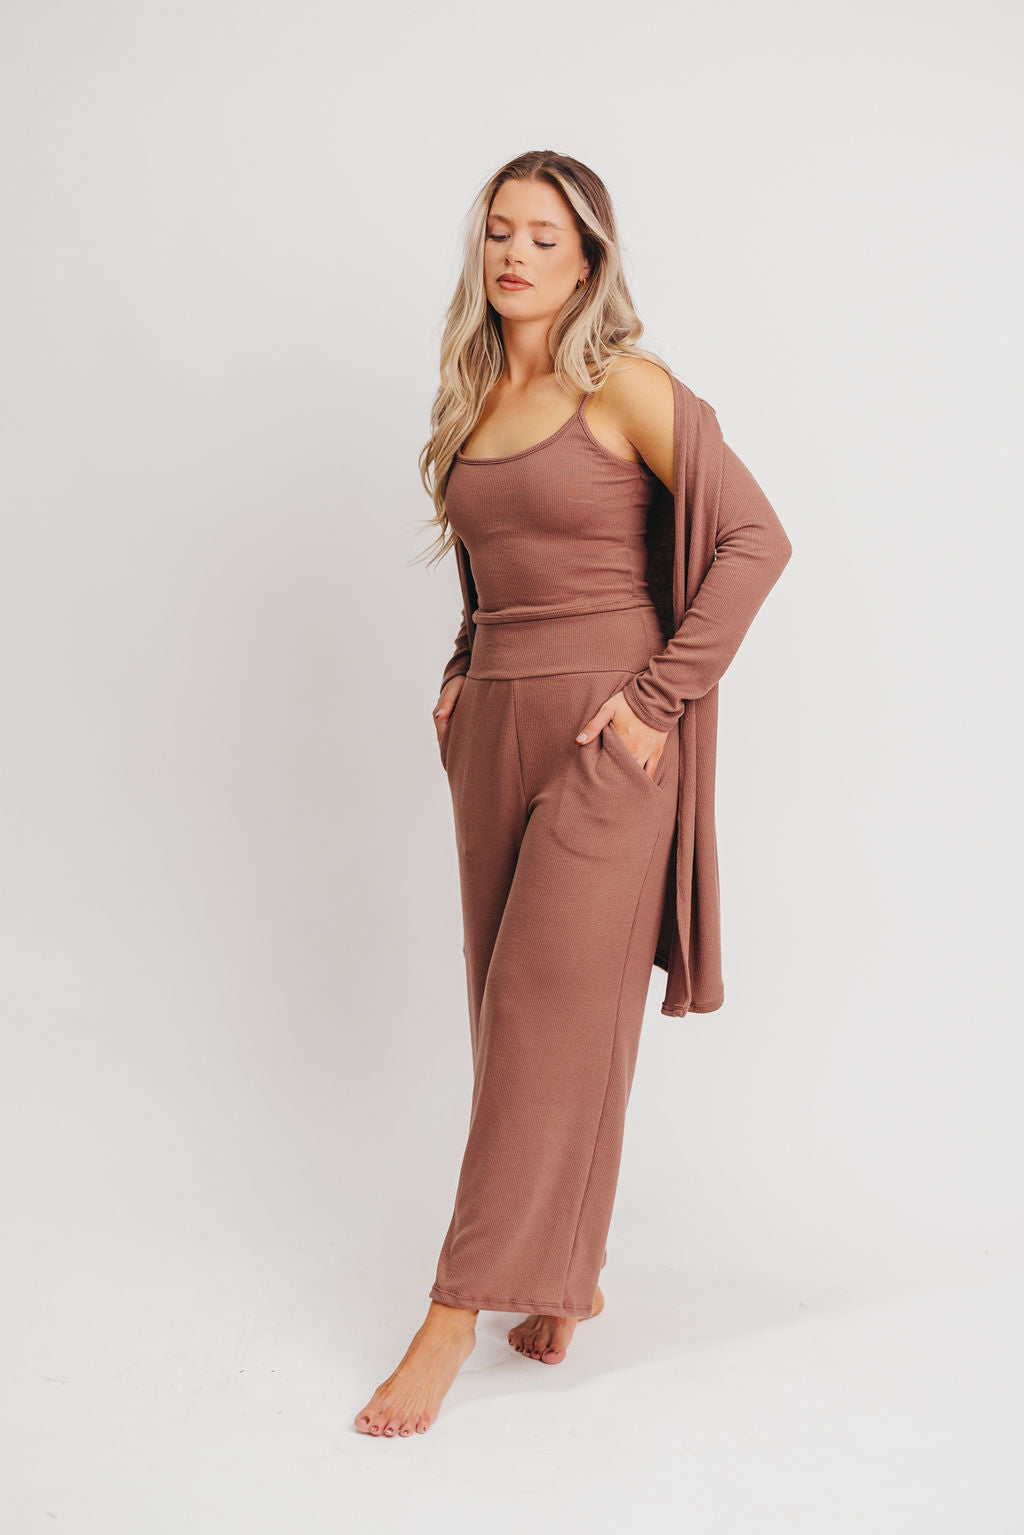 Birdie Ribbed Tank and Wide Leg Pant Set in Brown - Inclusive Sizing (S-2X)